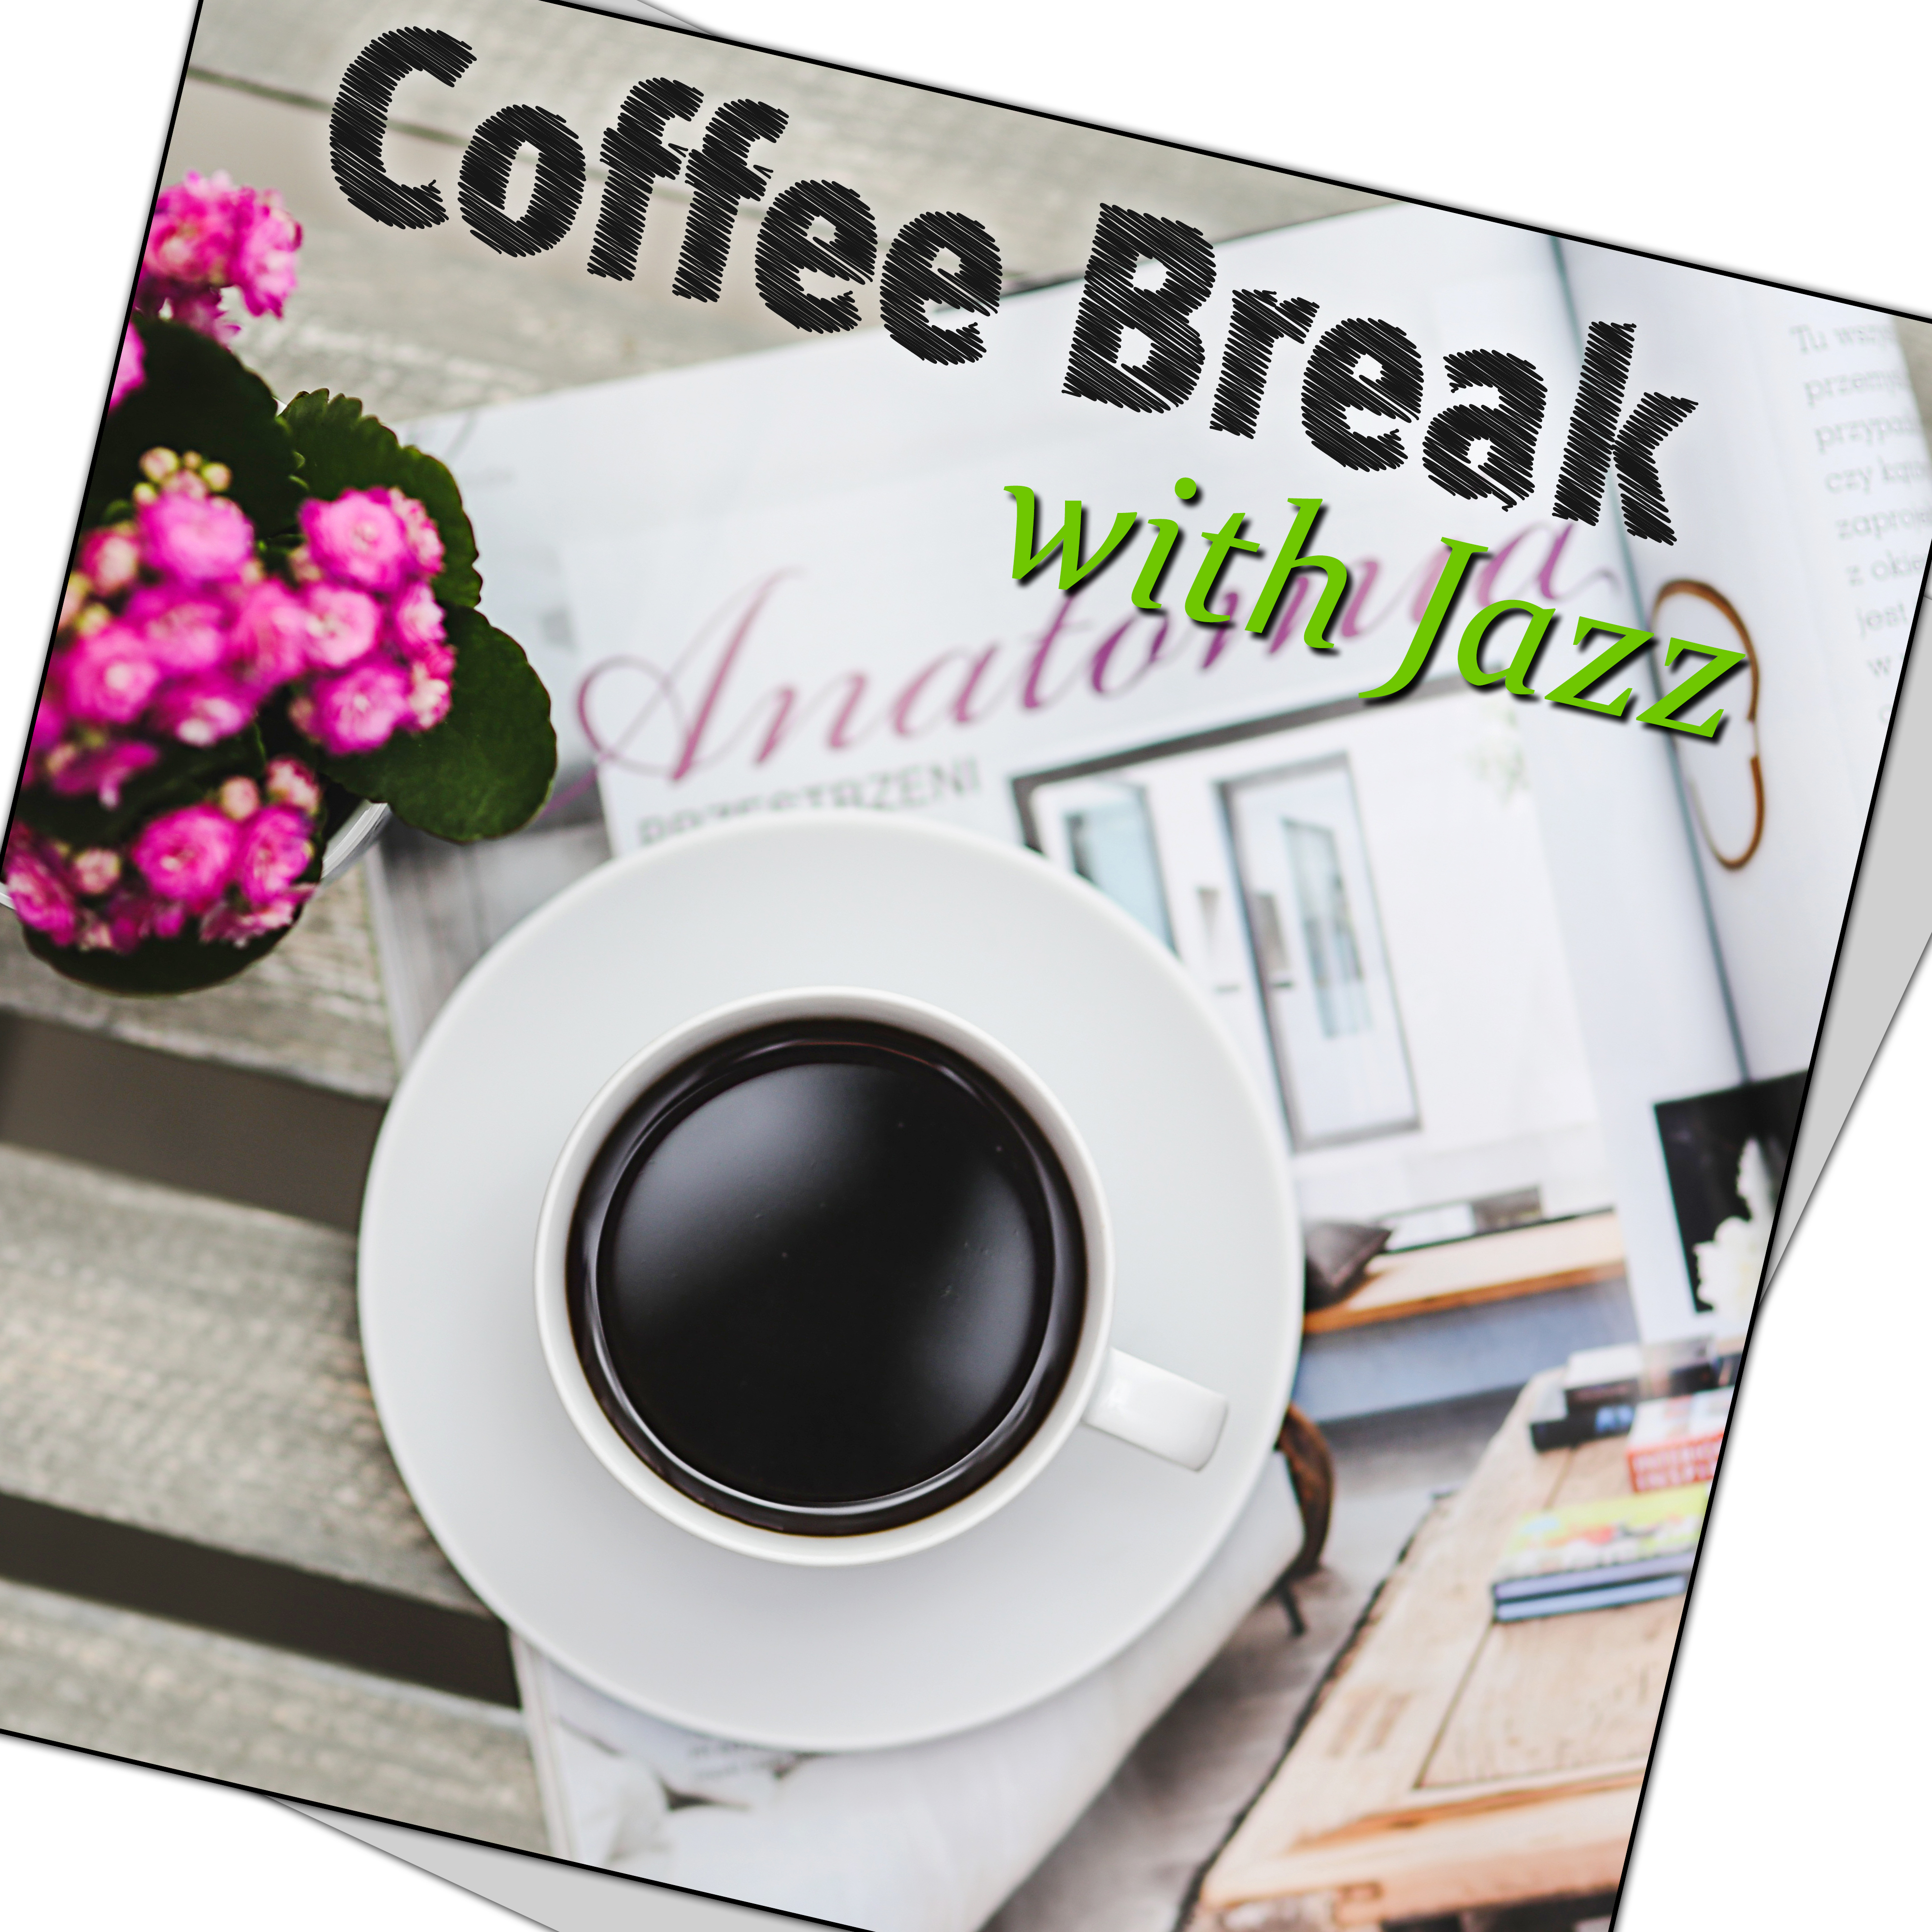 Coffee Break with Jazz  Morning Meditation, Tea Time, Chillout Music, Good Day with Music, Piano Bar, Harmony of Senses, Relaxing Music,  Wake Up, Smooth Jazz